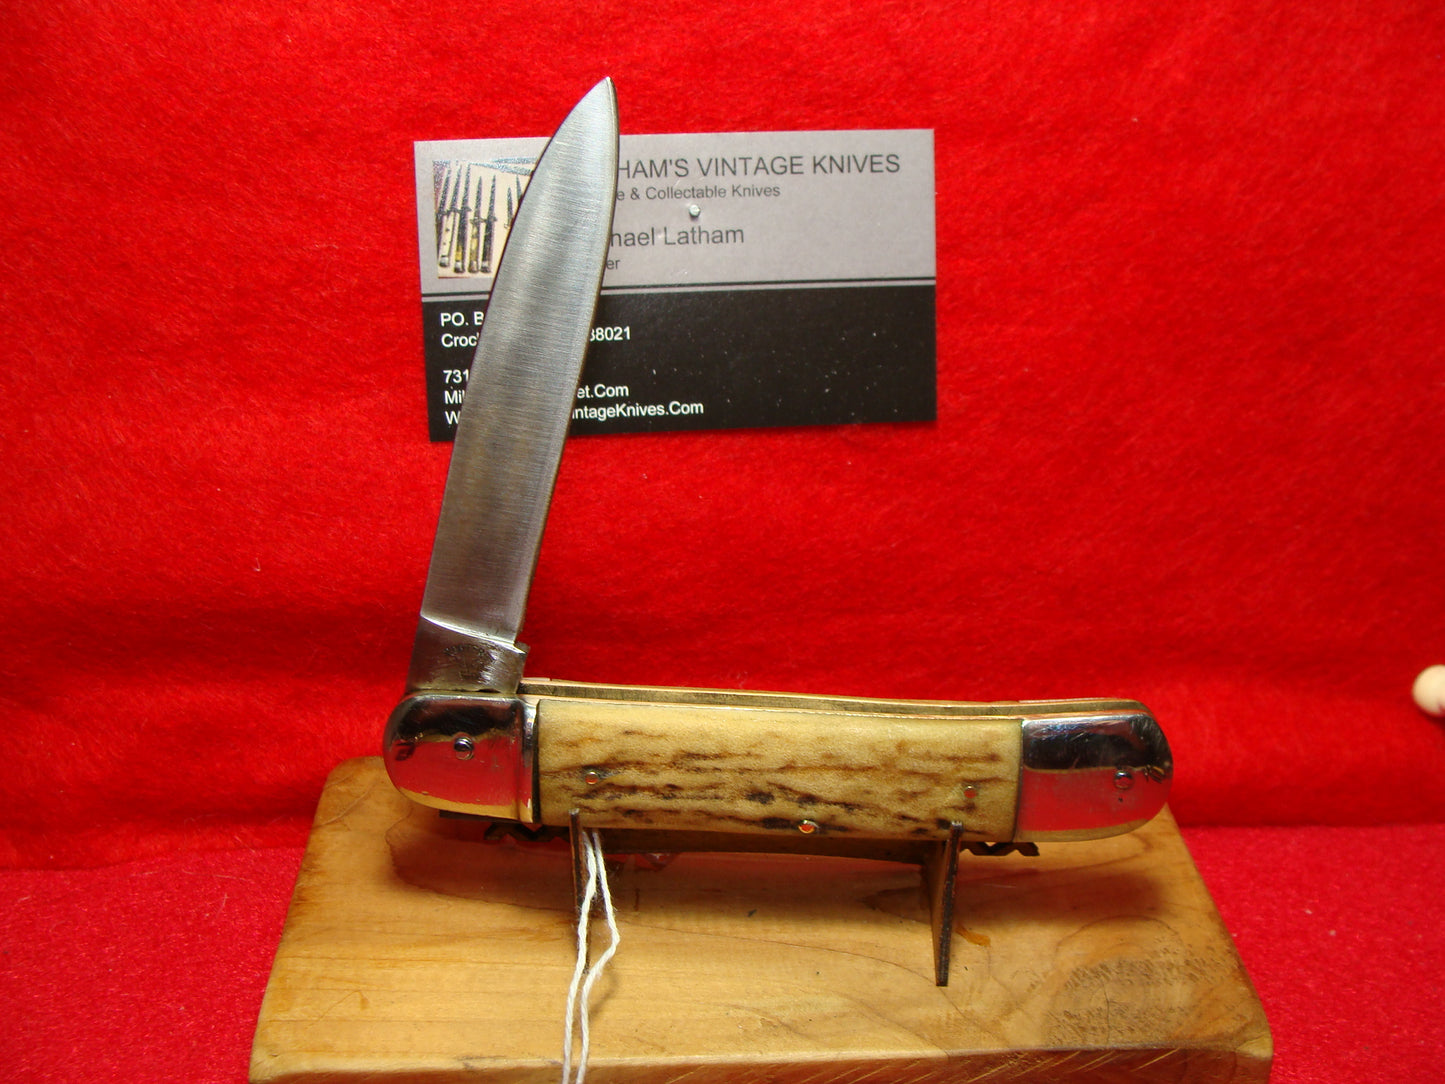 BONSA SOLINGEN GERMANY 1955-65 LEVER AUTOMATIC SPRINGER 11 CM GERMAN AUTOMATIC KNIFE STAG HANDLES